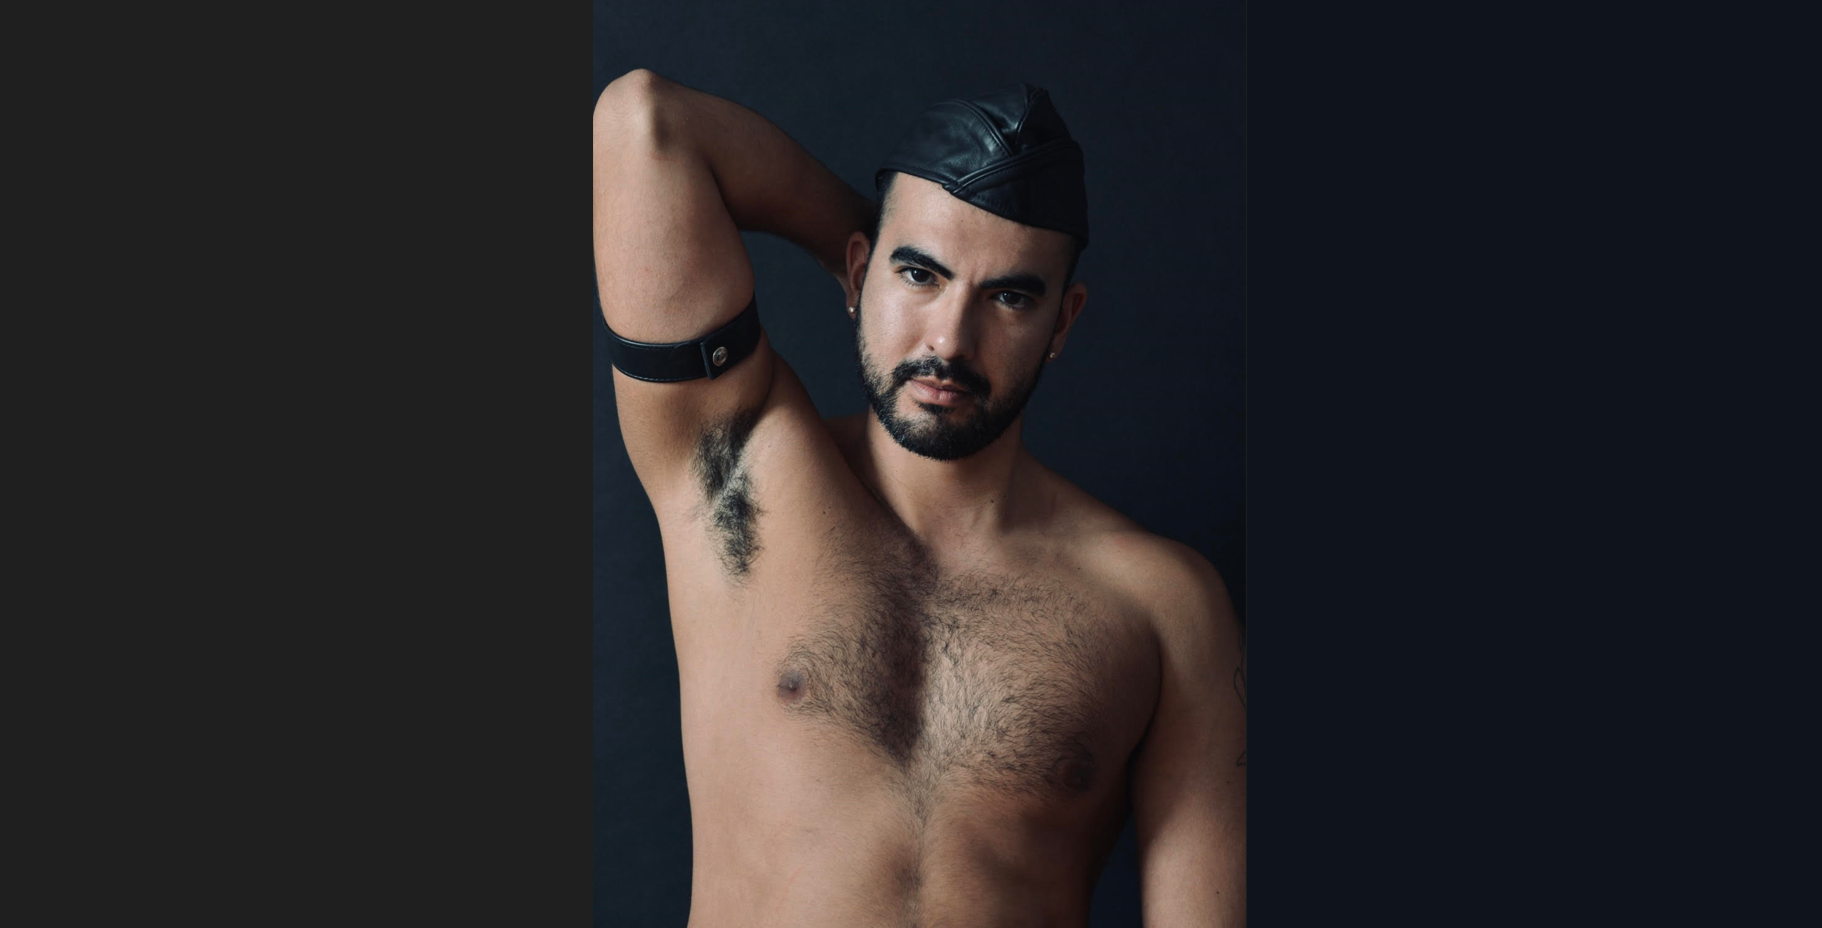 gay male posing shirtless wearing gay leather cap with his arm over his head